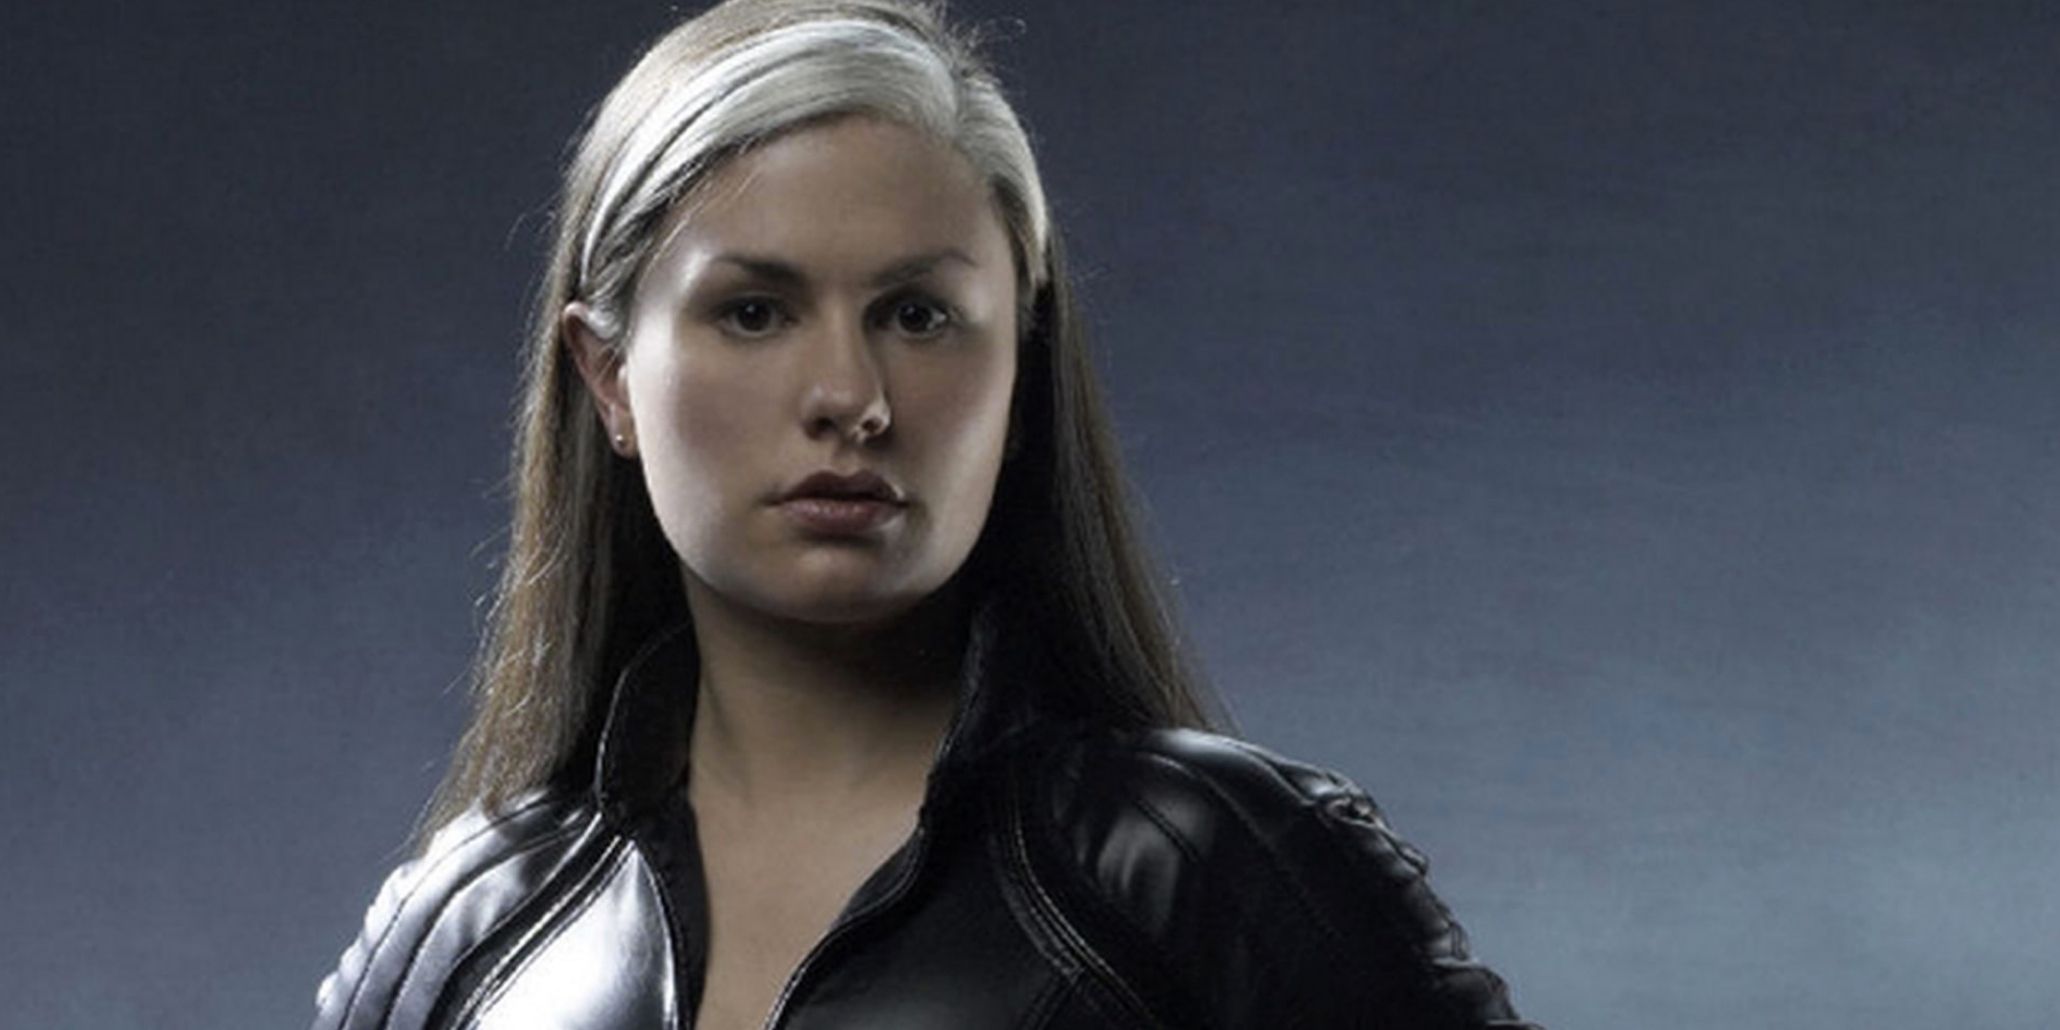 15 Strongest Female Marvel Characters